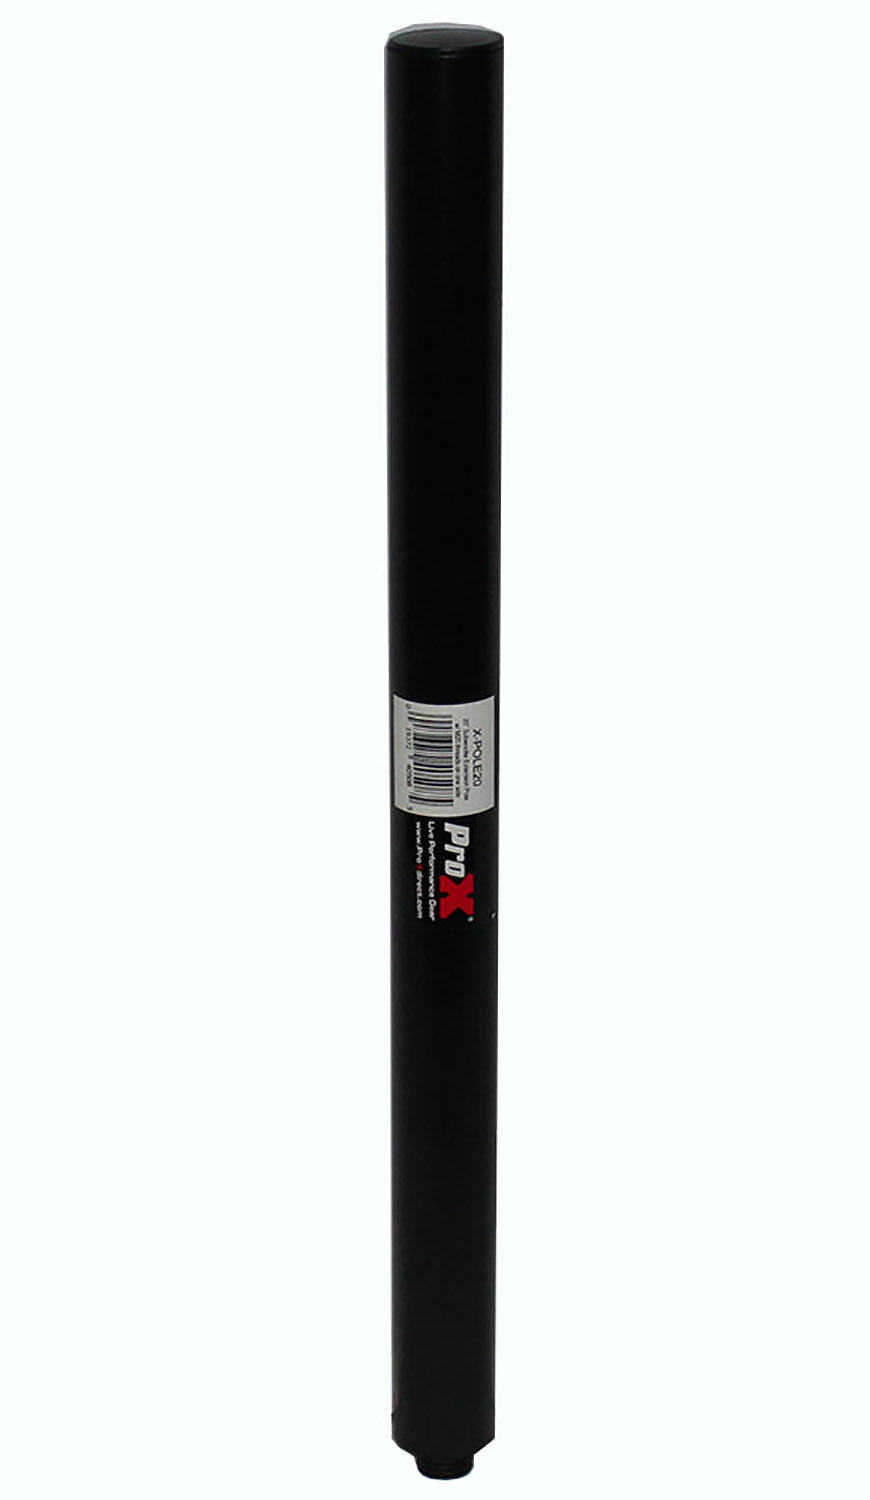 B-Stock: ProX X-POLE20, 20" Speaker Mount Pole with M20 Mount Threads by ProX Cases